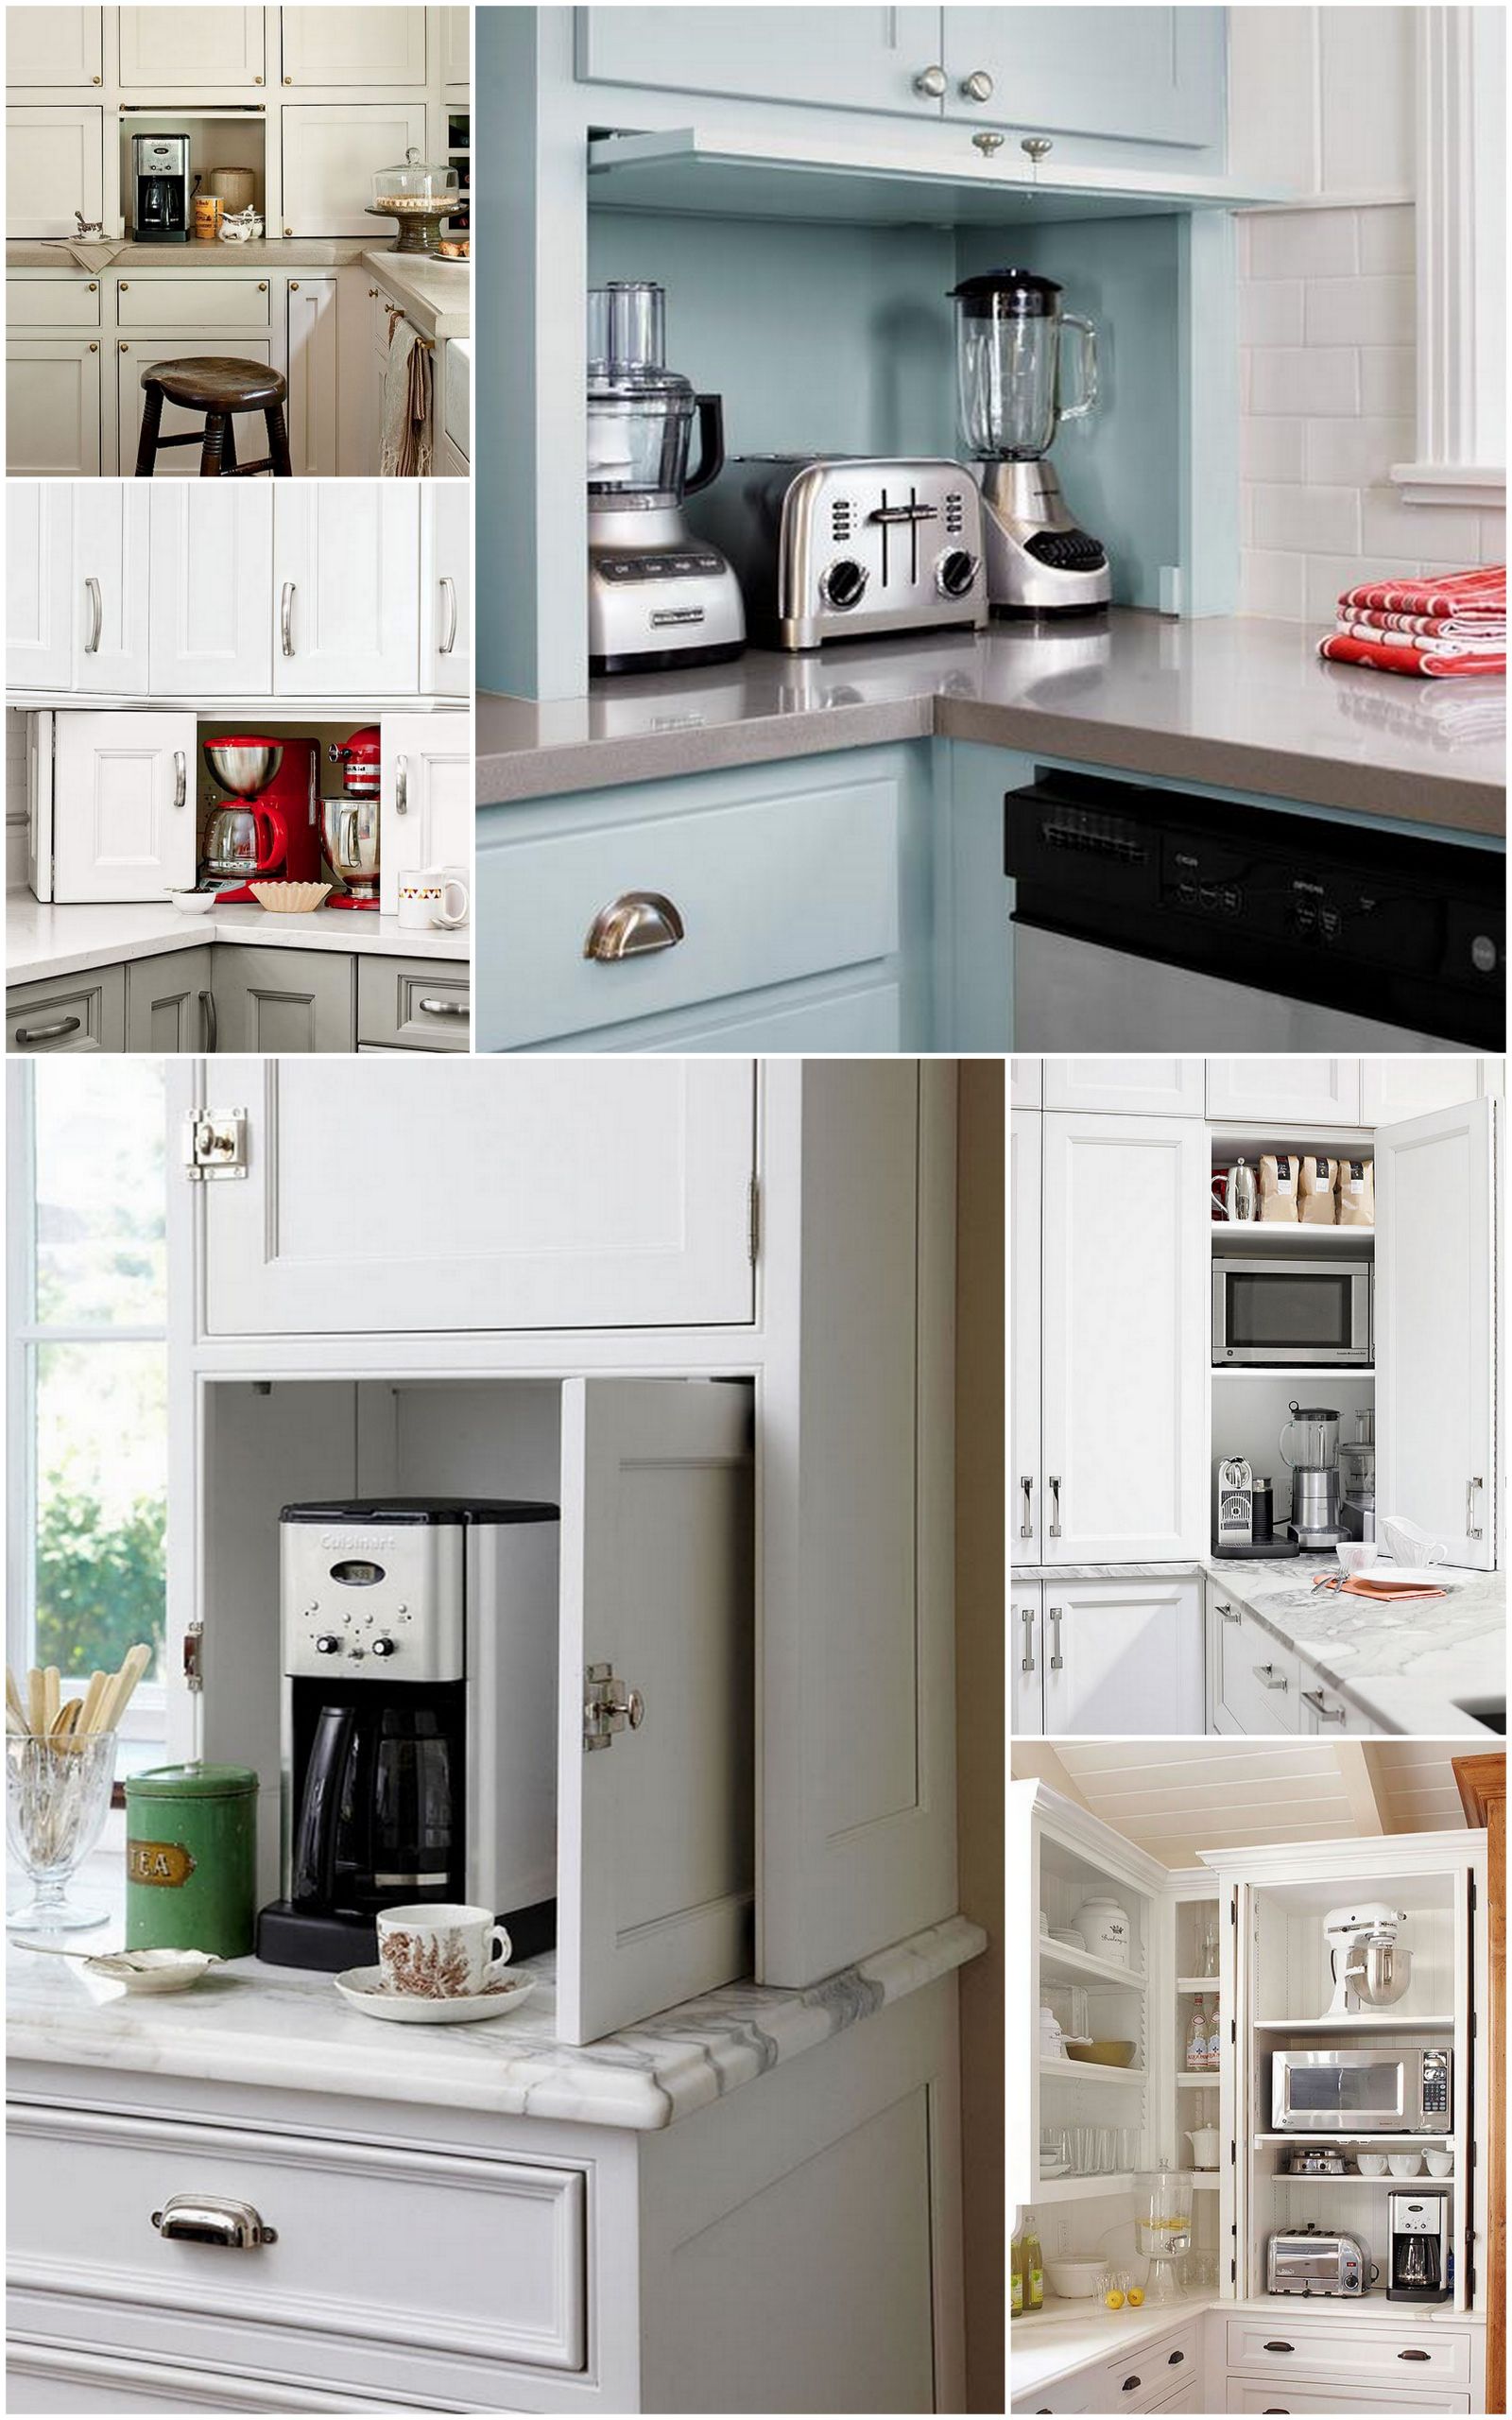 Small Kitchen Appliance Storage
 The Ideal Kitchen Appliance Storage